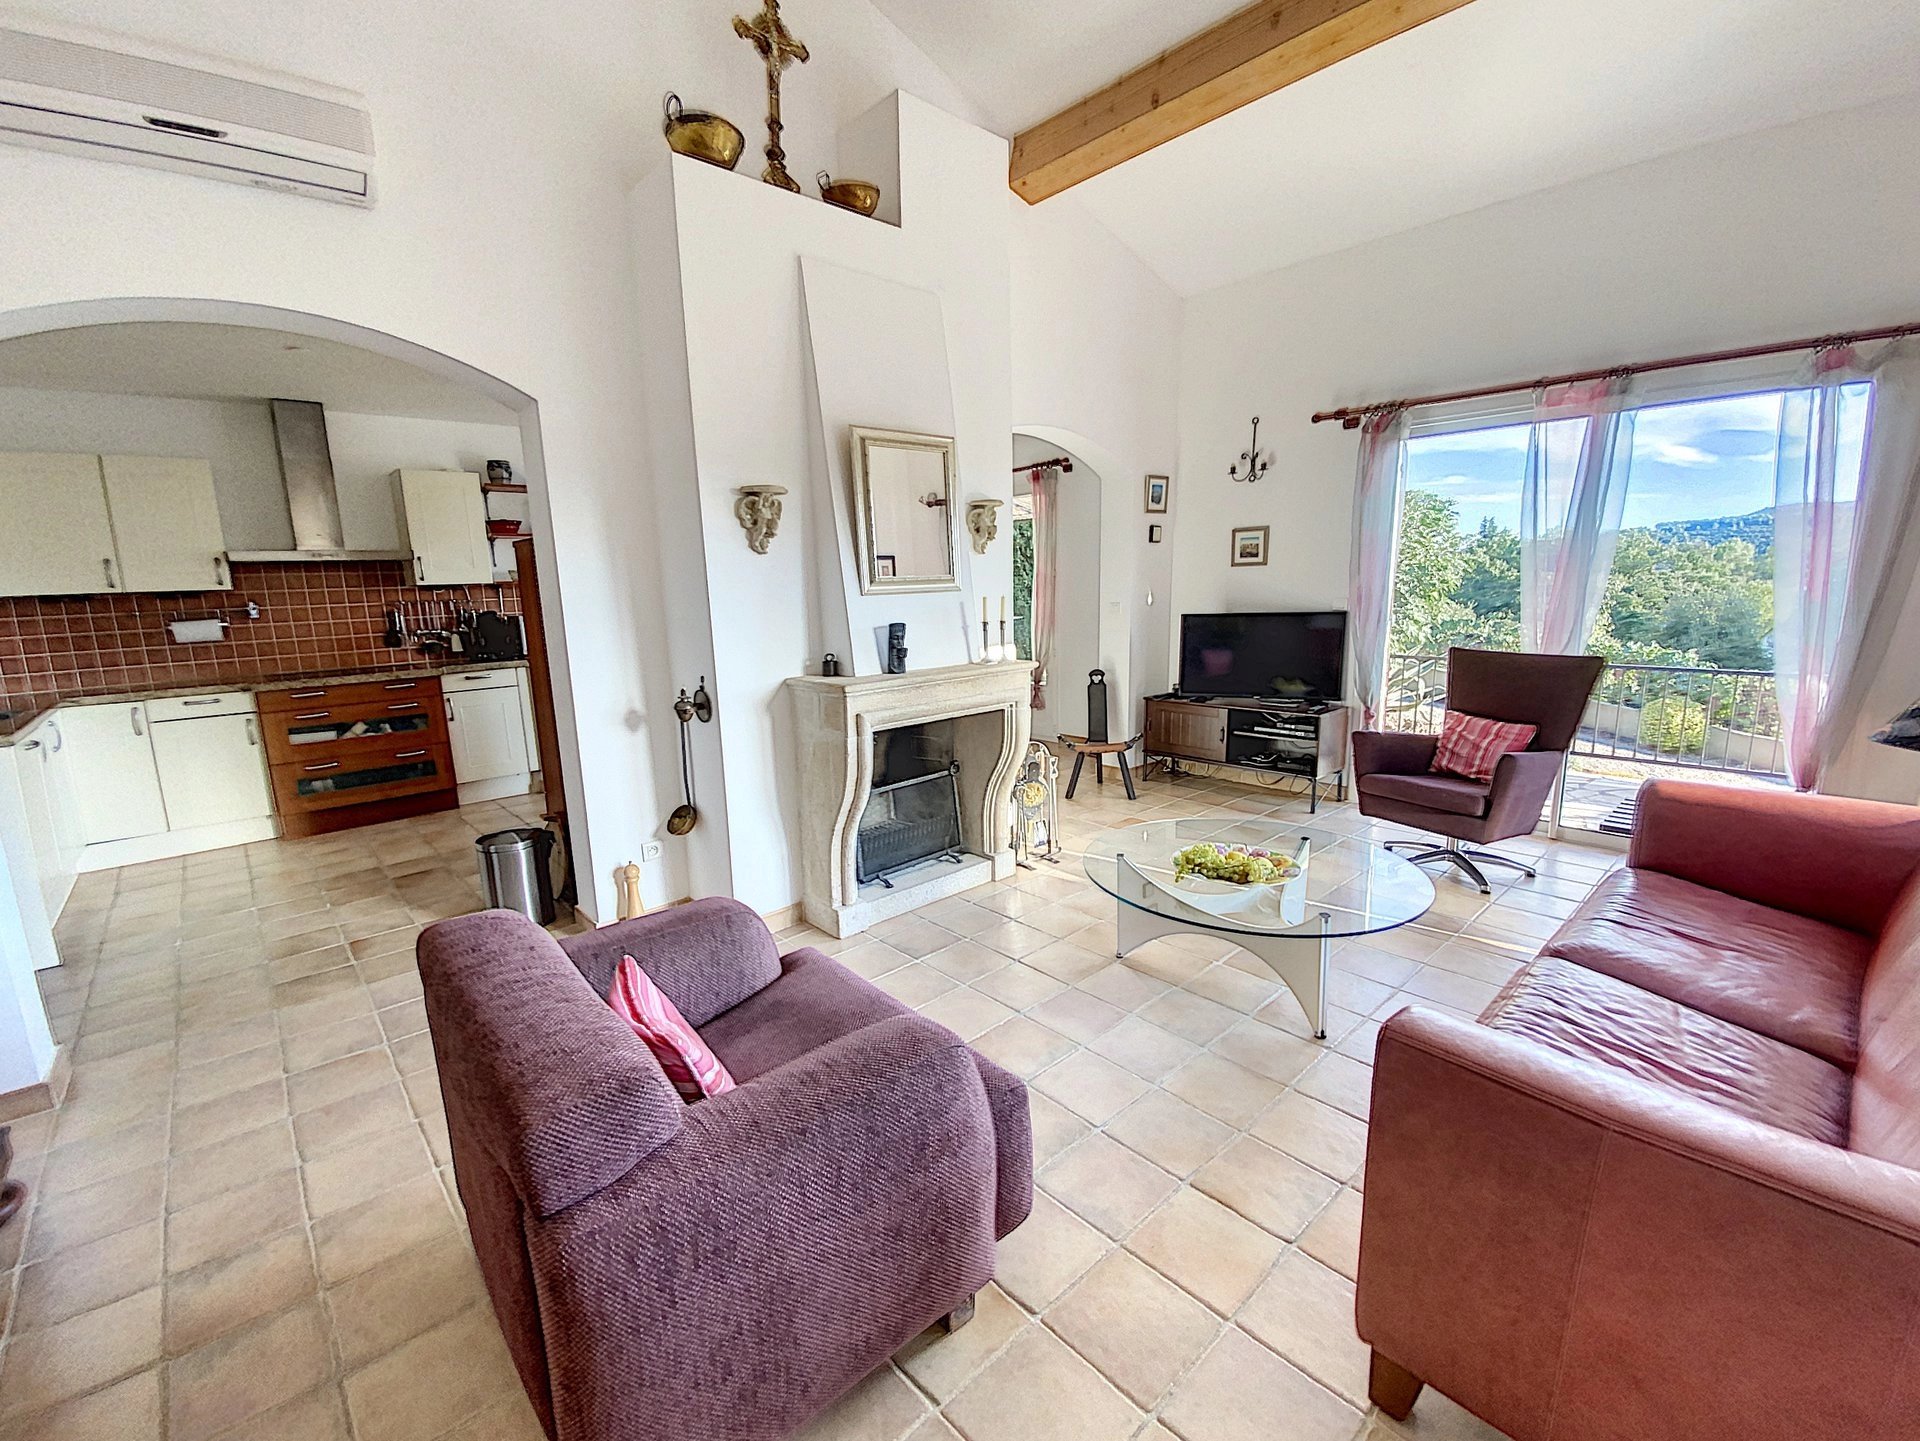 Beautiful villa with pool and views, walking distance from the village